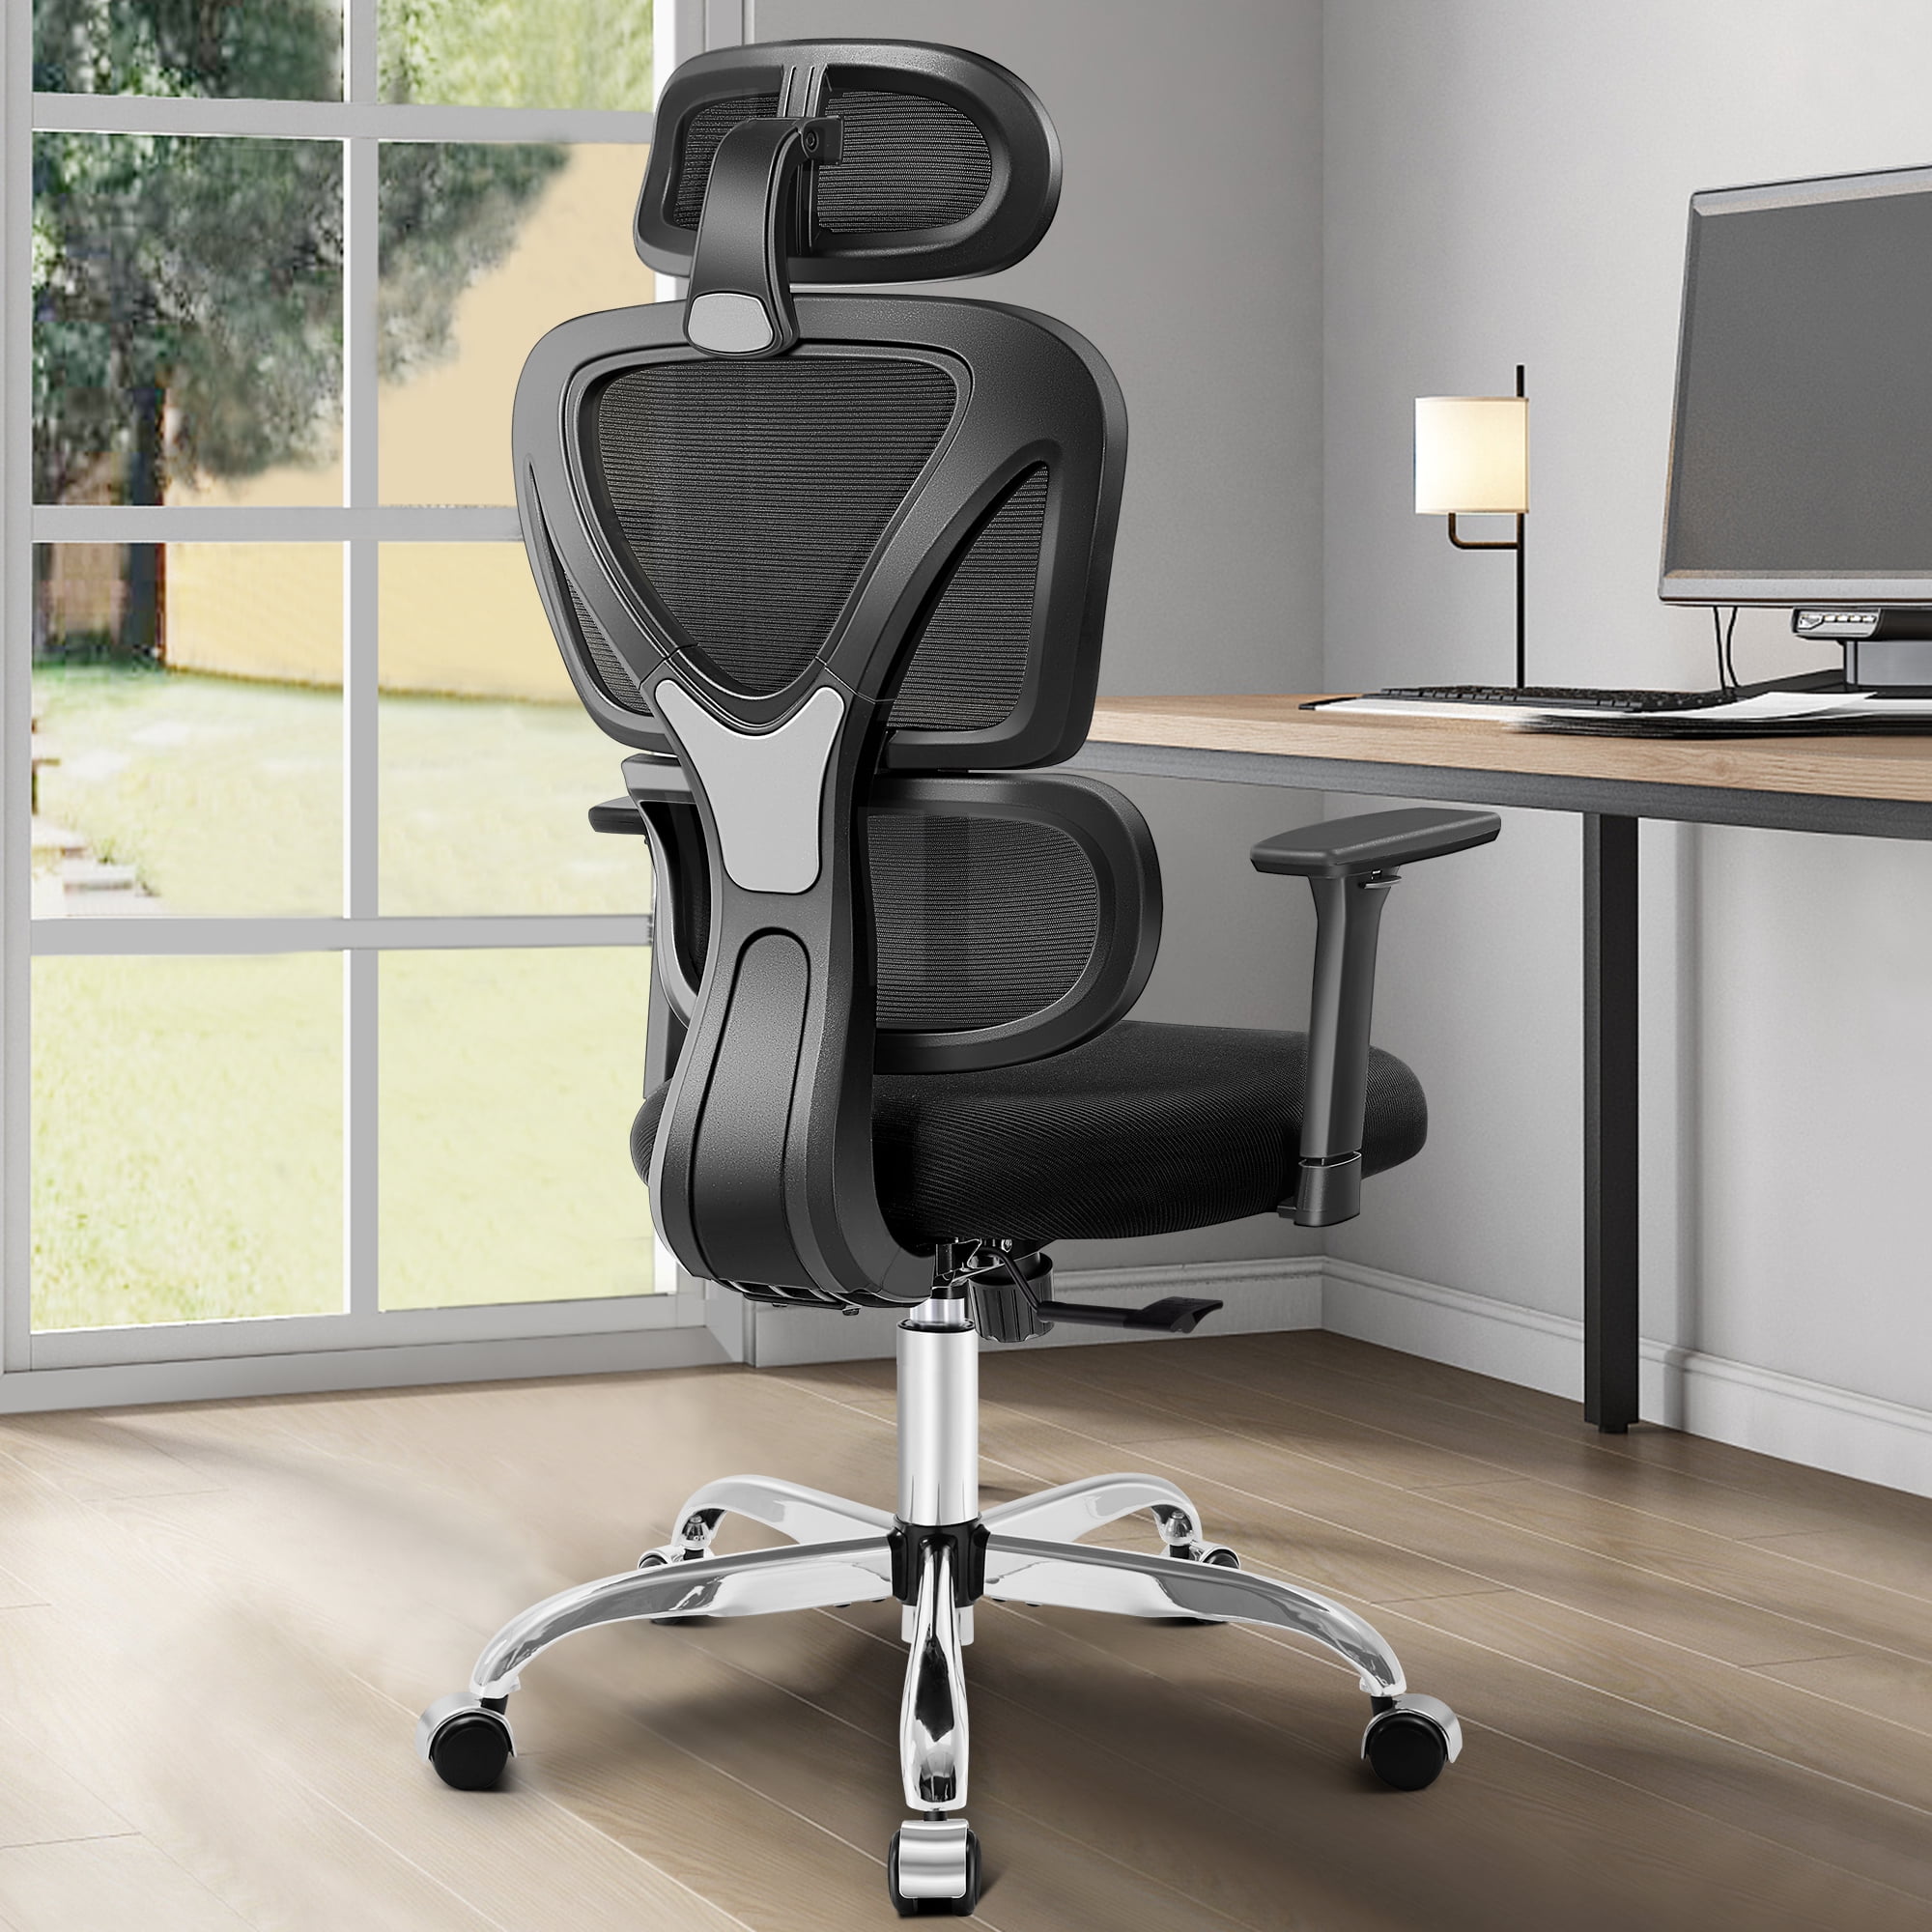 Ergonomic Chair With Lumbar Support – lanzhome.com